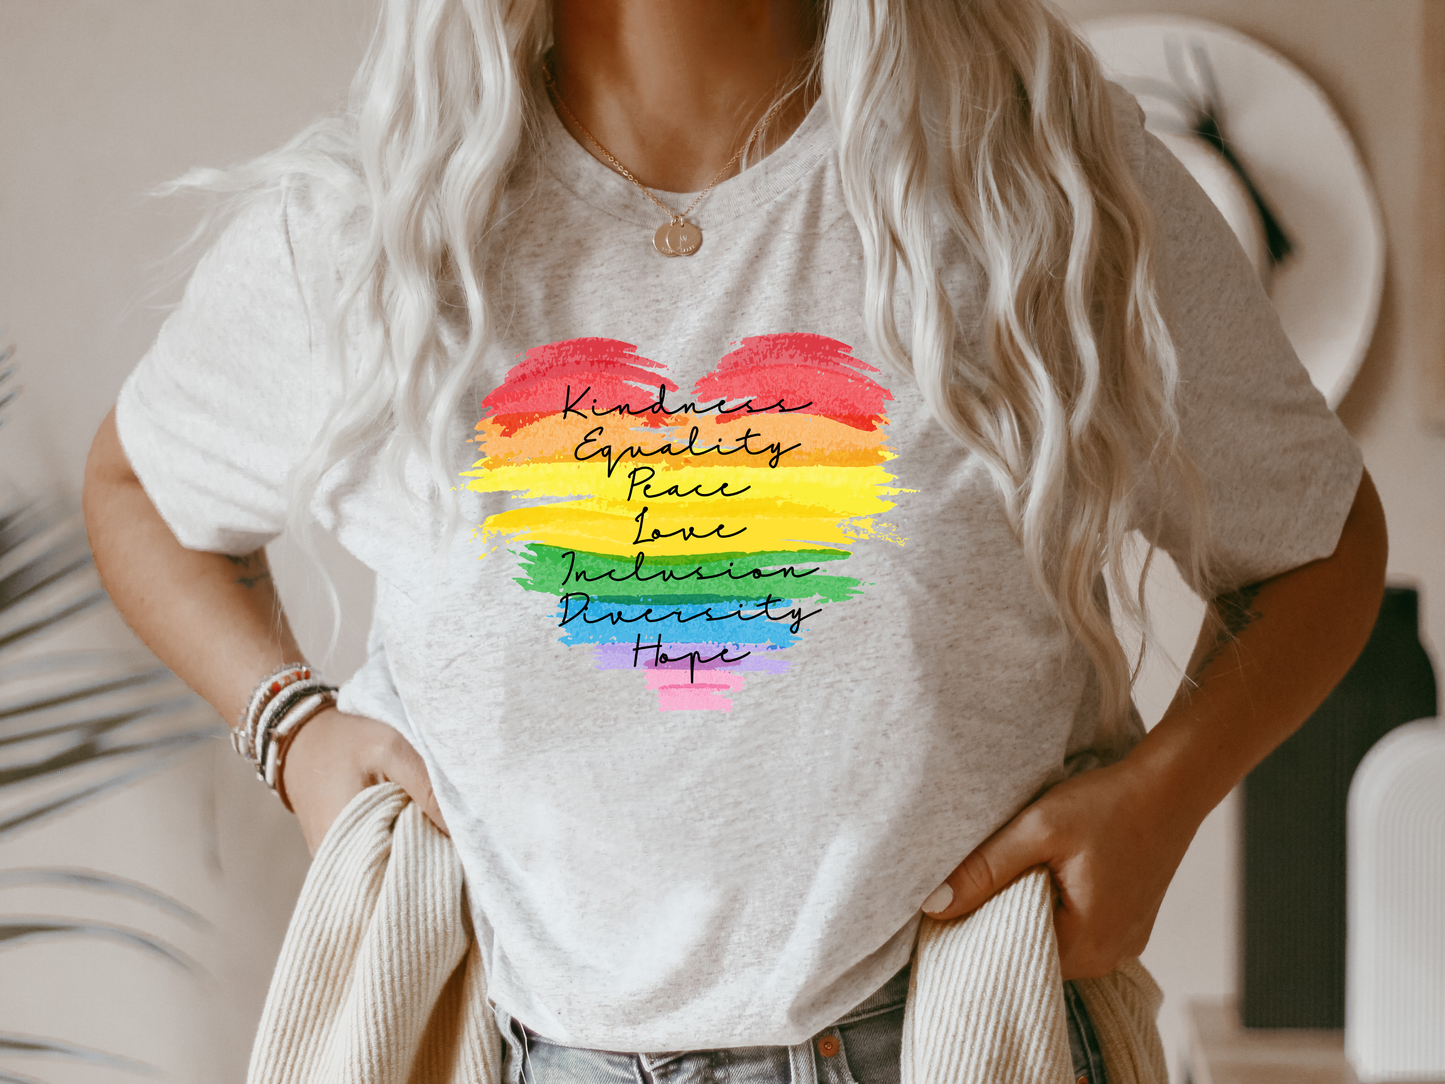 Kindness Equality Race Love Inclusion Diversity Hope In Rainbow Heart Tee